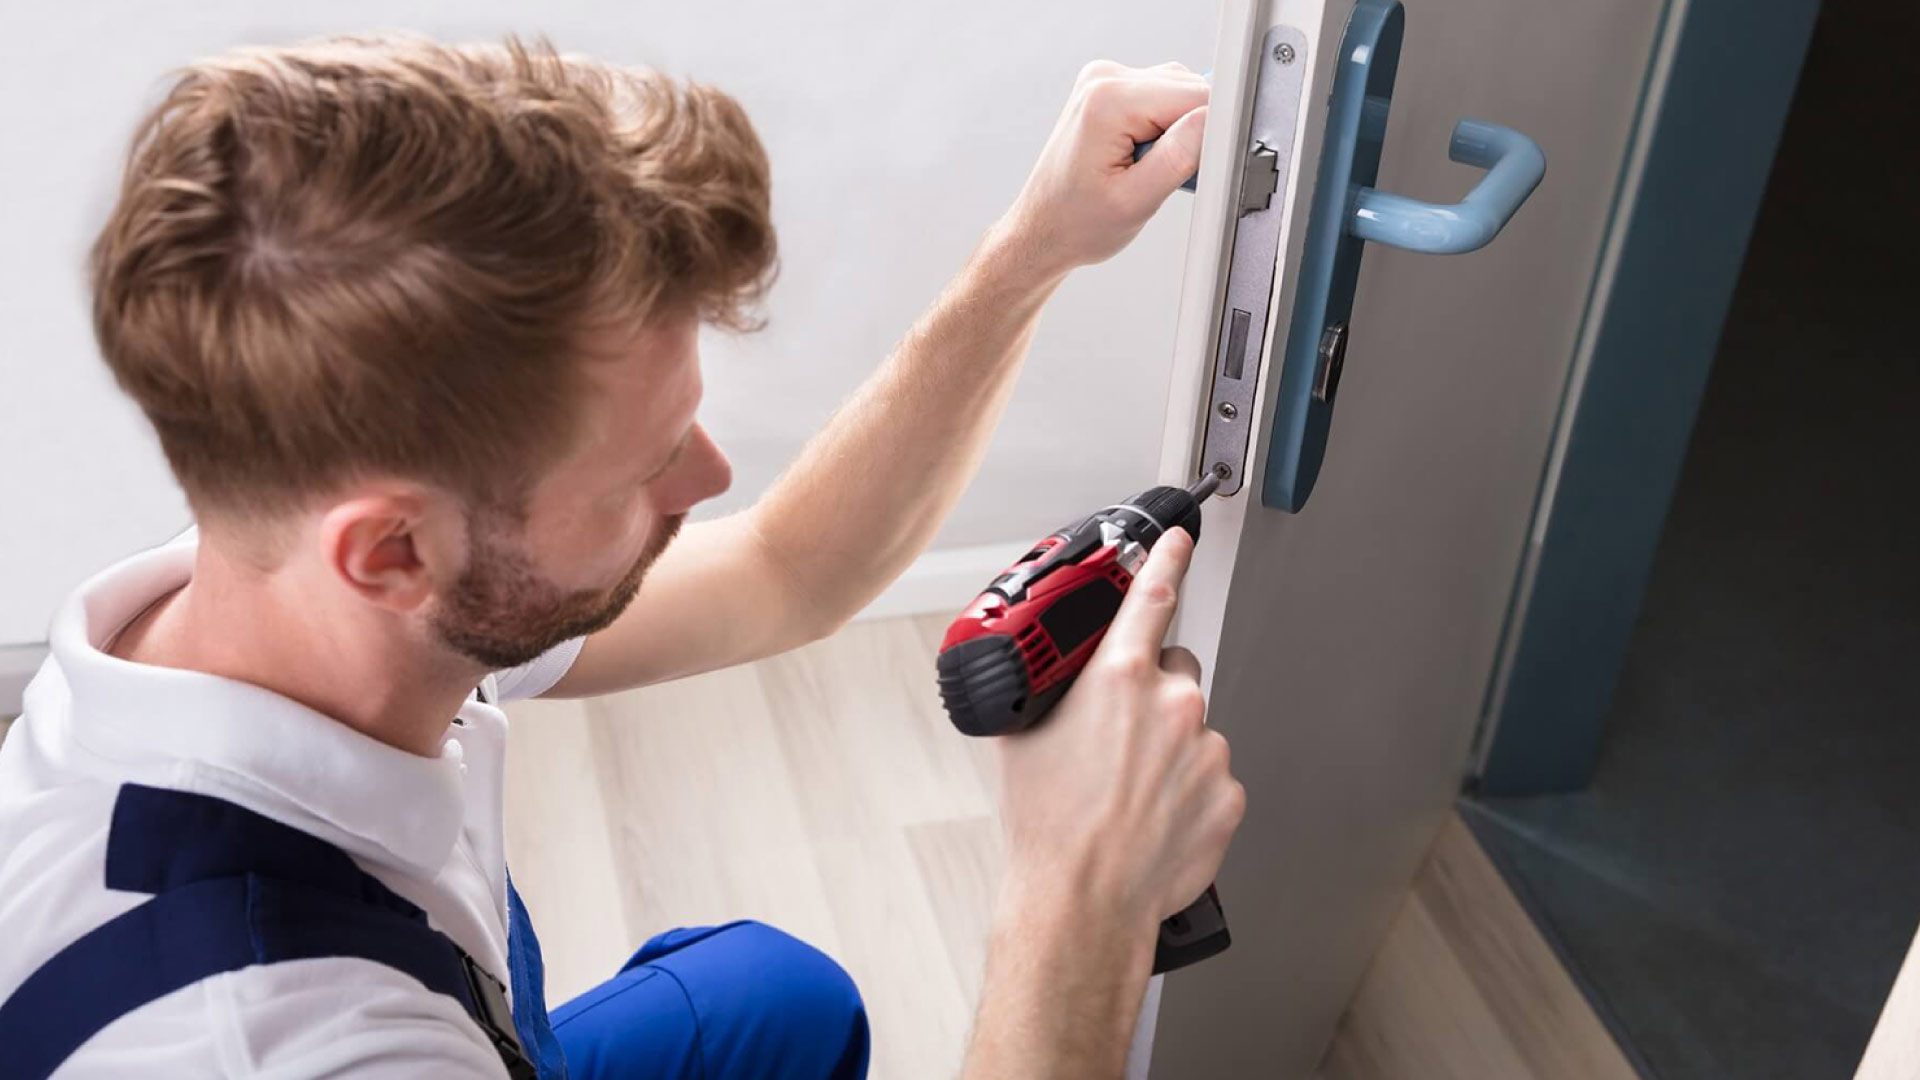 Residential locksmith Service in Charlotte, NC